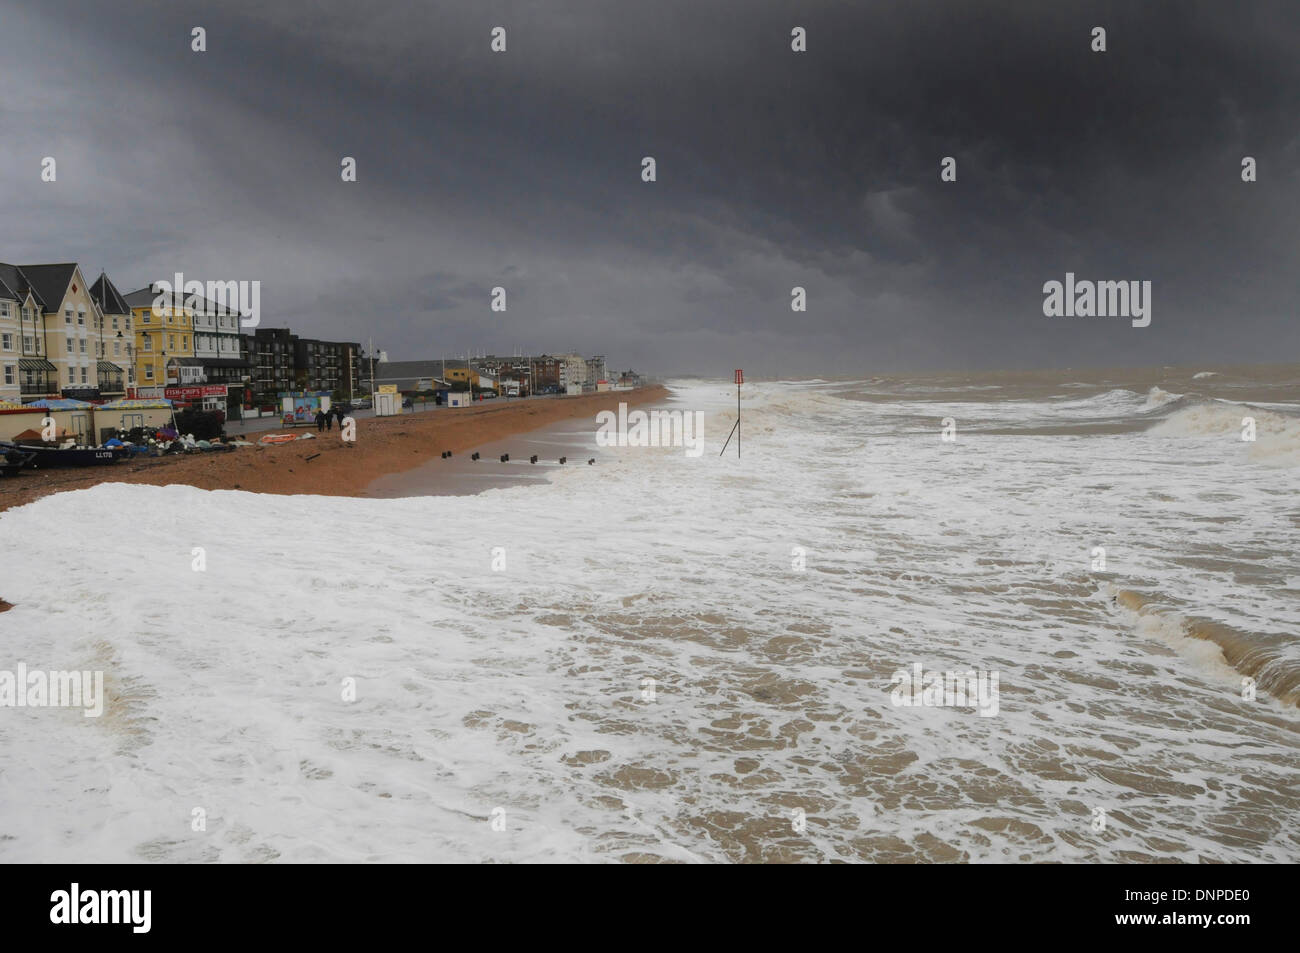 Bognor Regis a south coast holiday town shows its darker side in this image of the seafront sea front during a winter storm Stock Photo